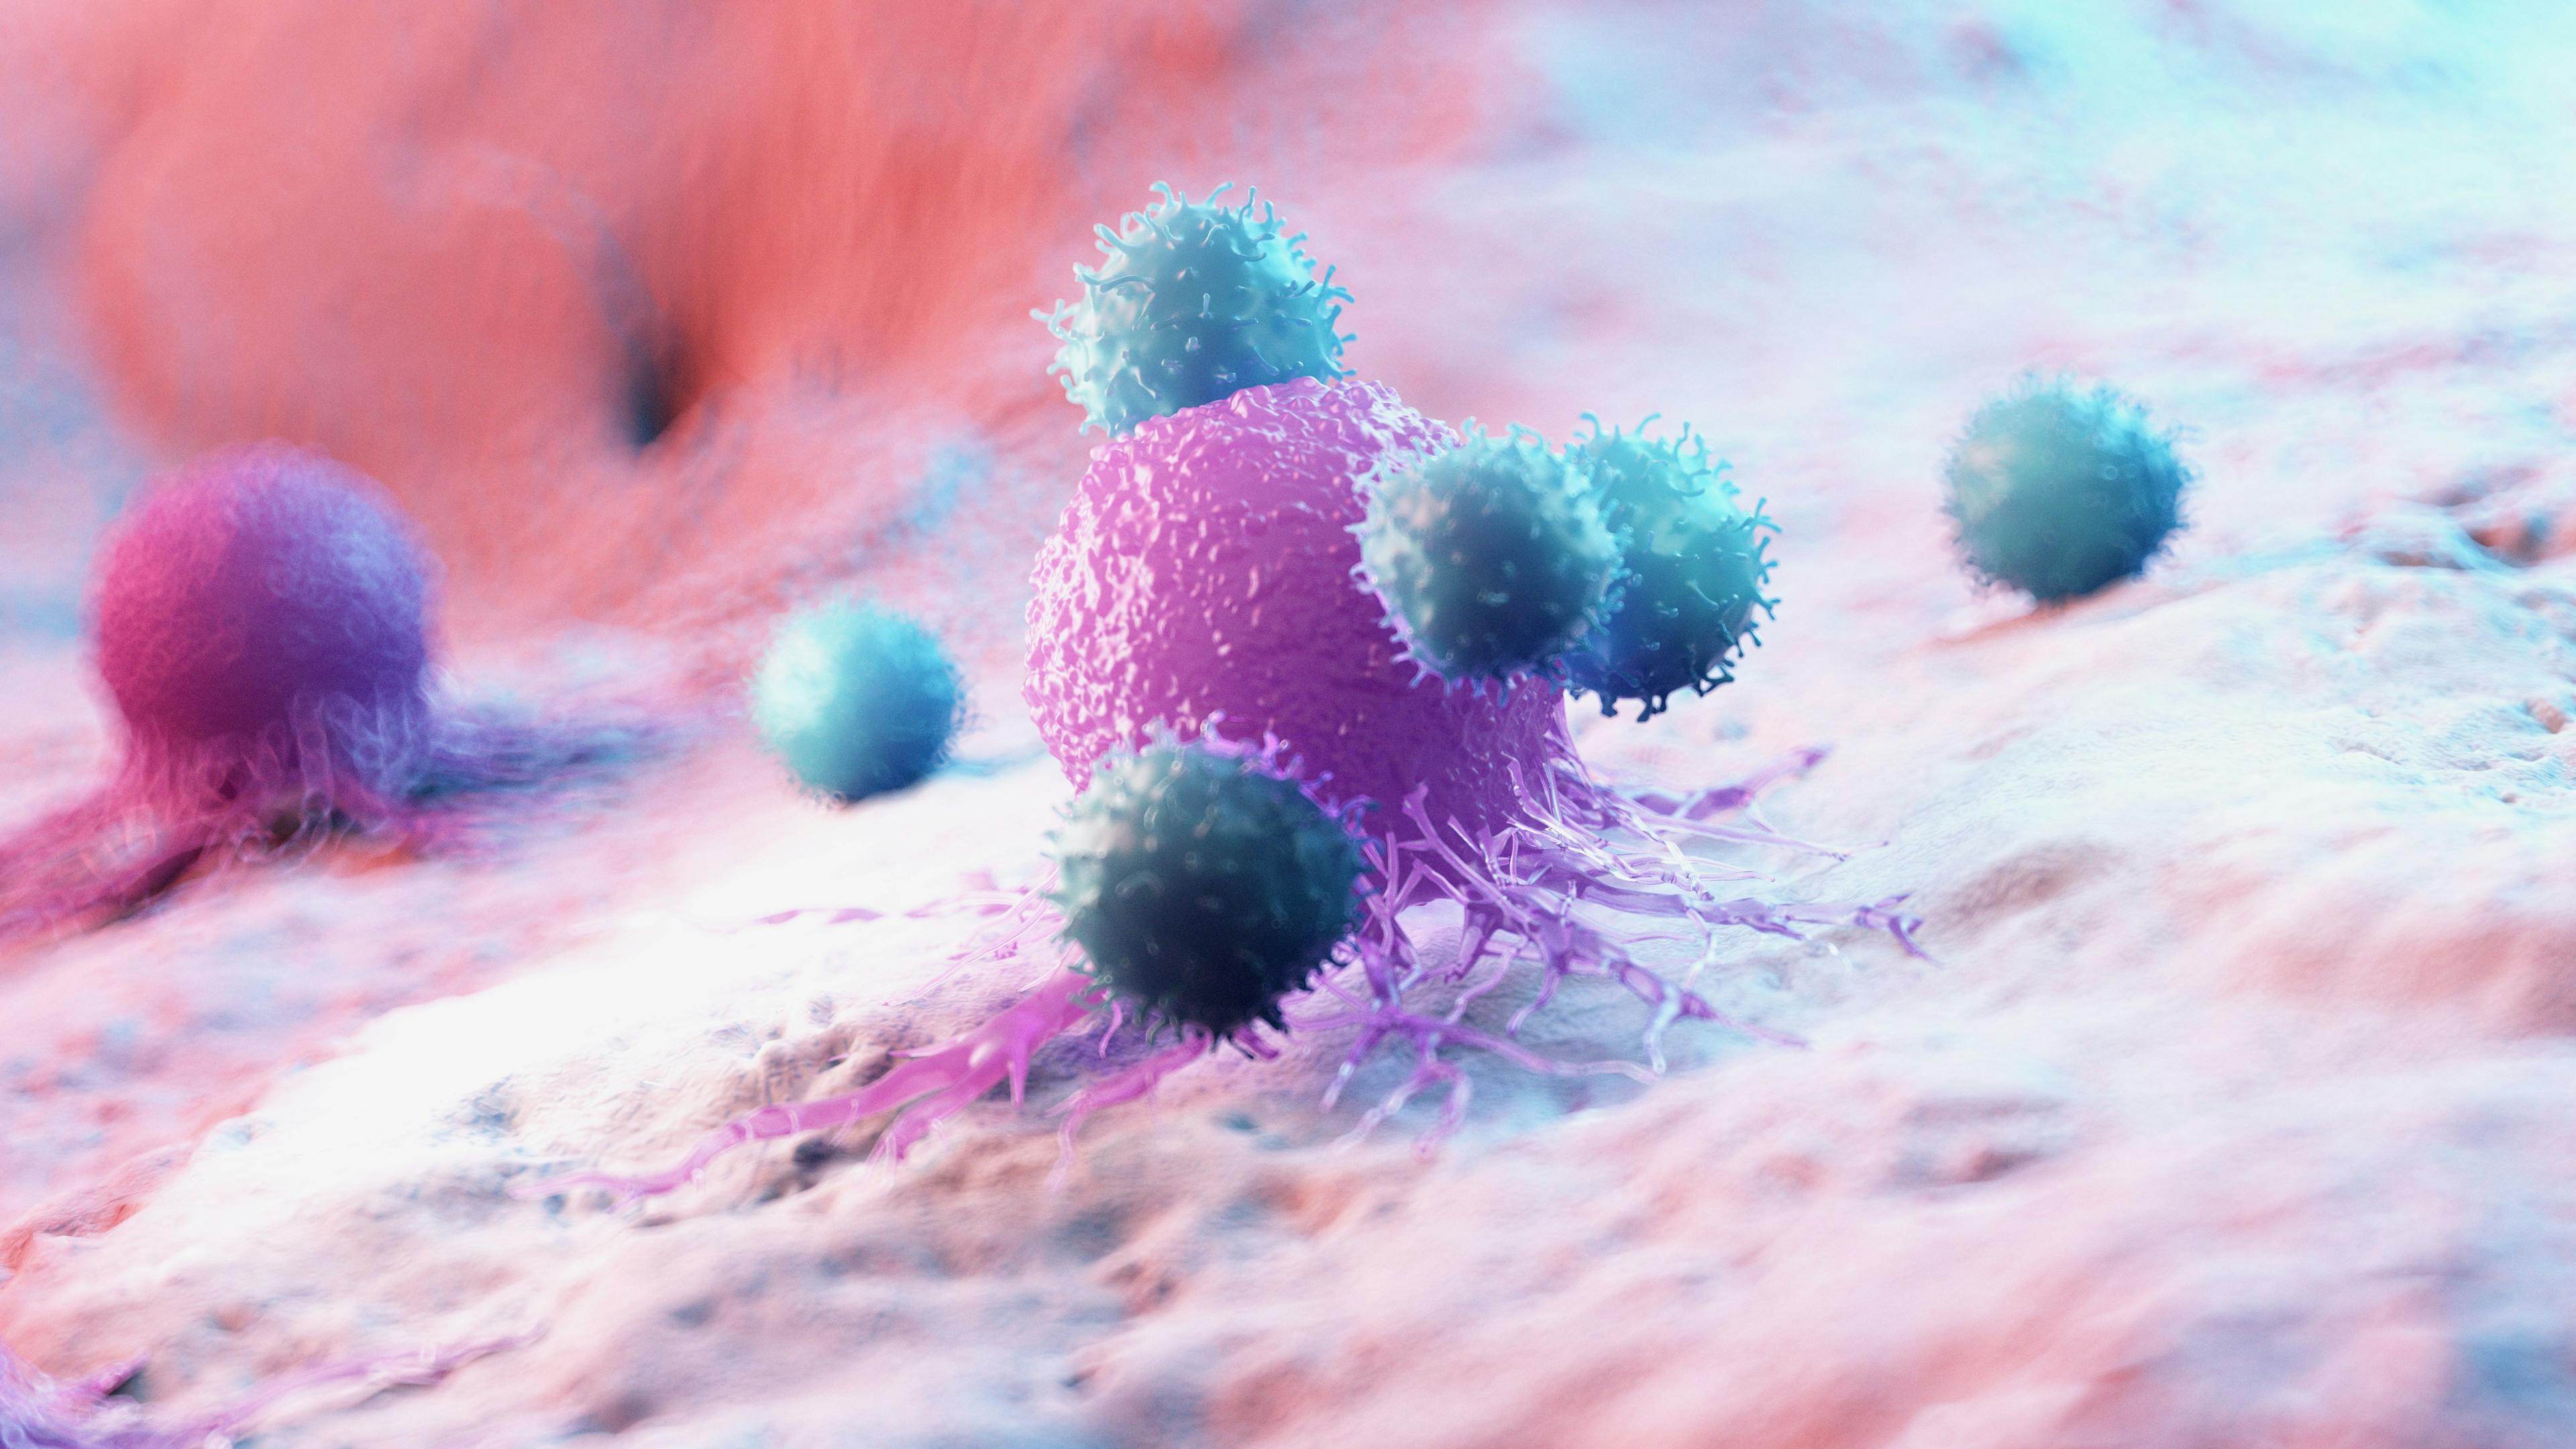 : 3d rendered medically accurate illustration of leukocytes attacking a cancer cell |  stock.adobe.com